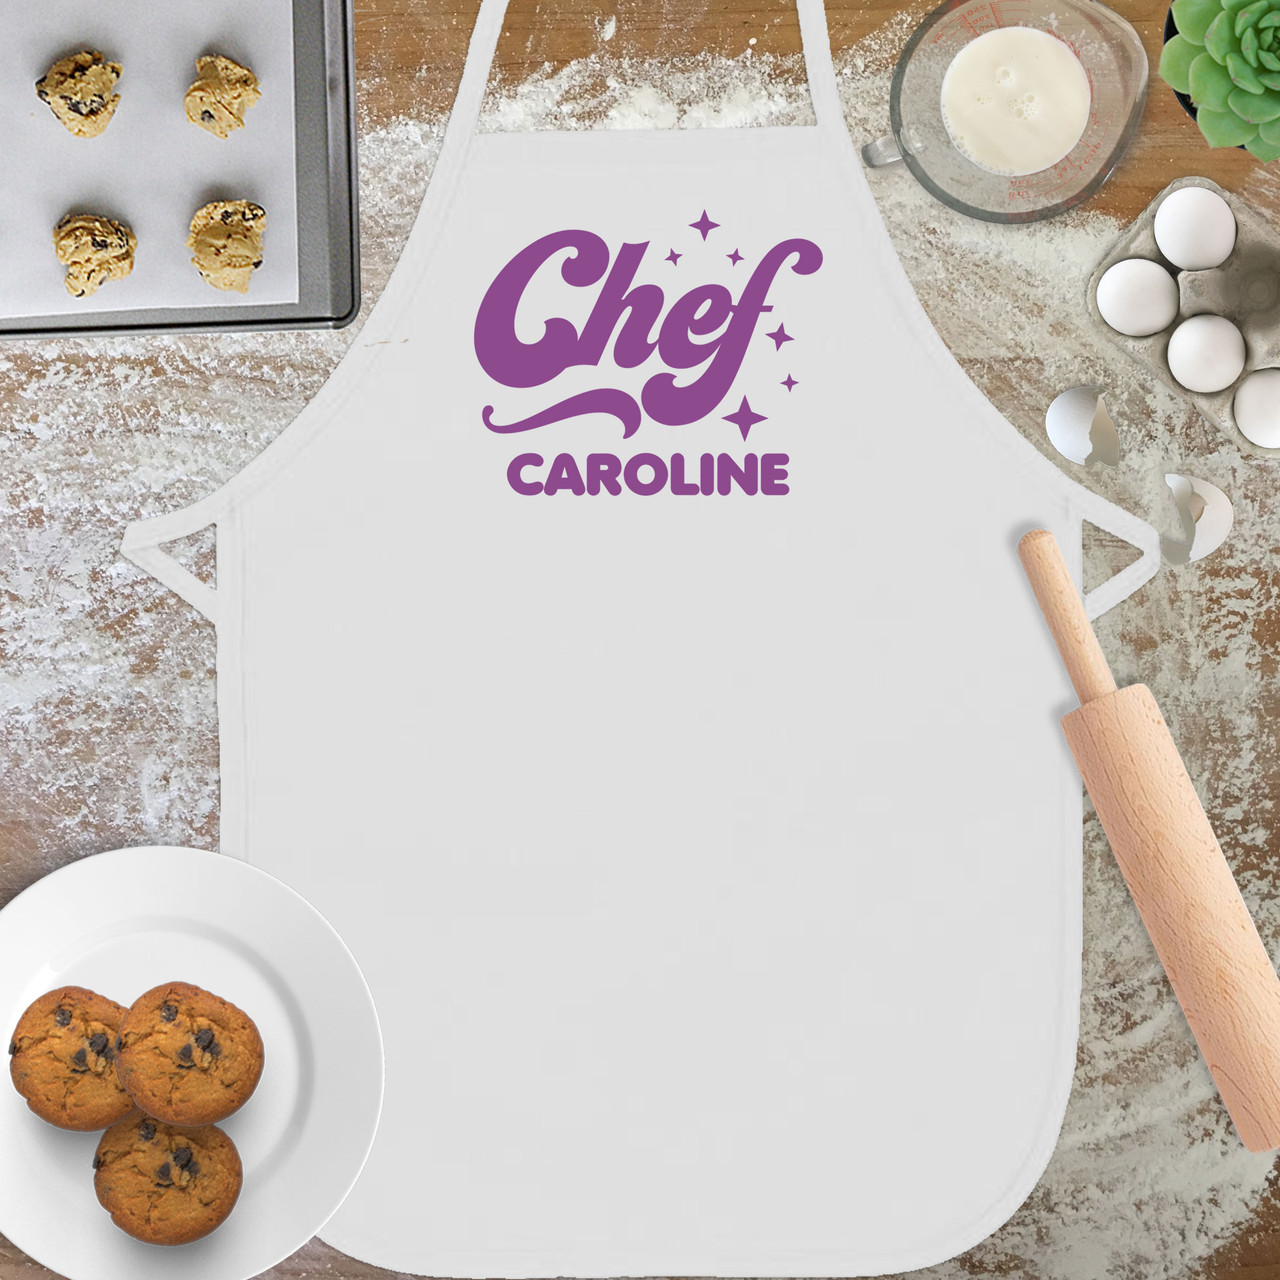 Funny Apron and Chef Hat Set Dude With the Food Chef Wear for 